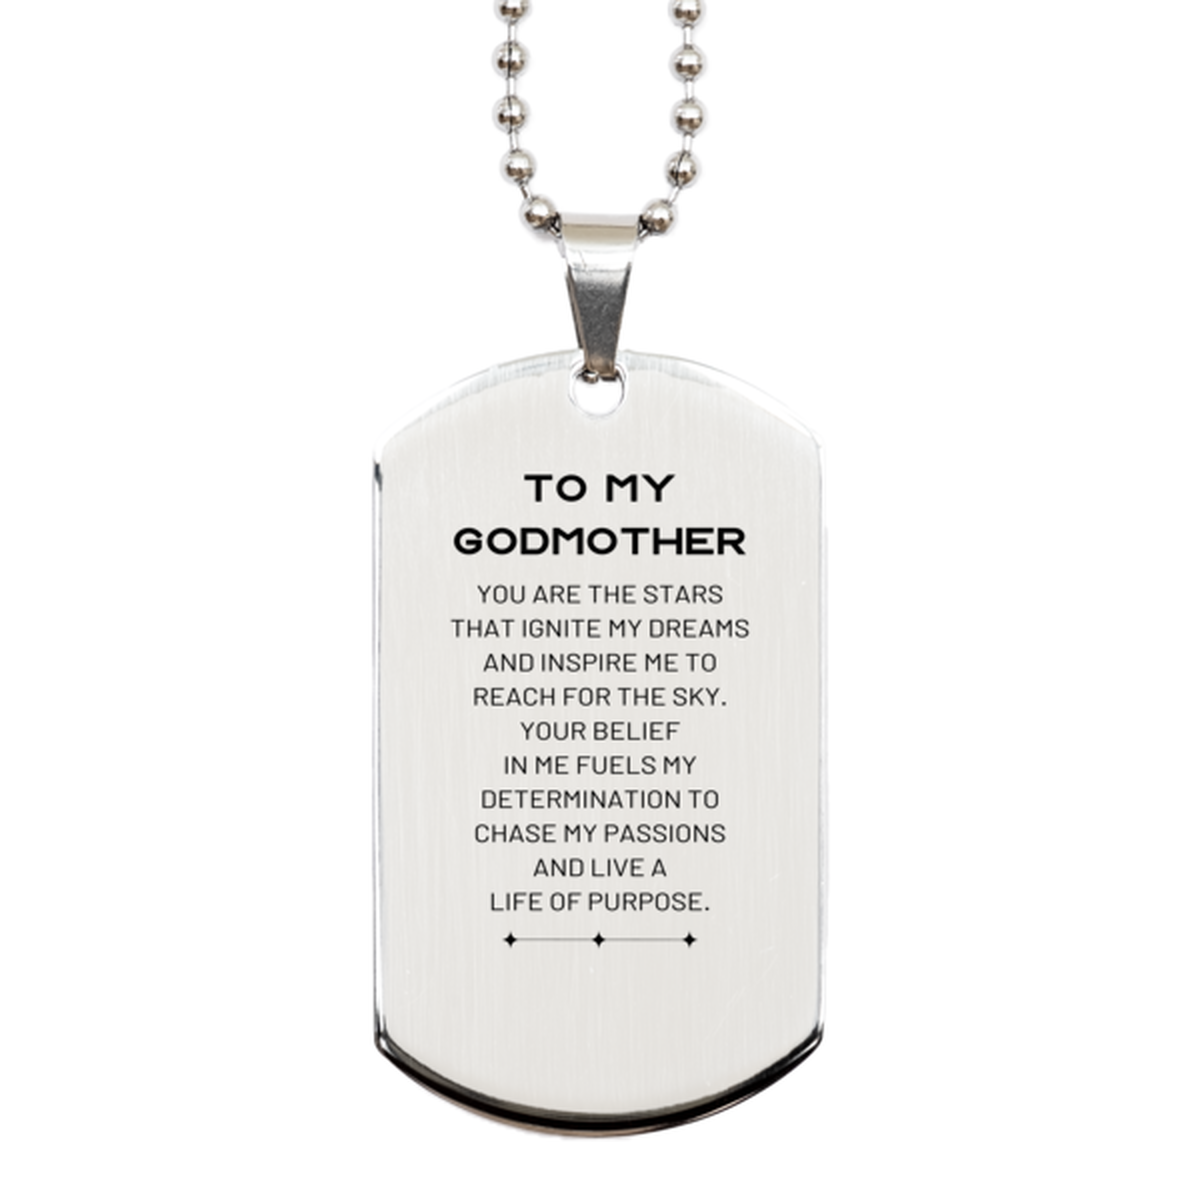 To My Godmother Silver Dog Tag, You are the stars that ignite my dreams and inspire me to reach for the sky, Birthday Unique Gifts For Godmother, Thank You Gifts For Godmother